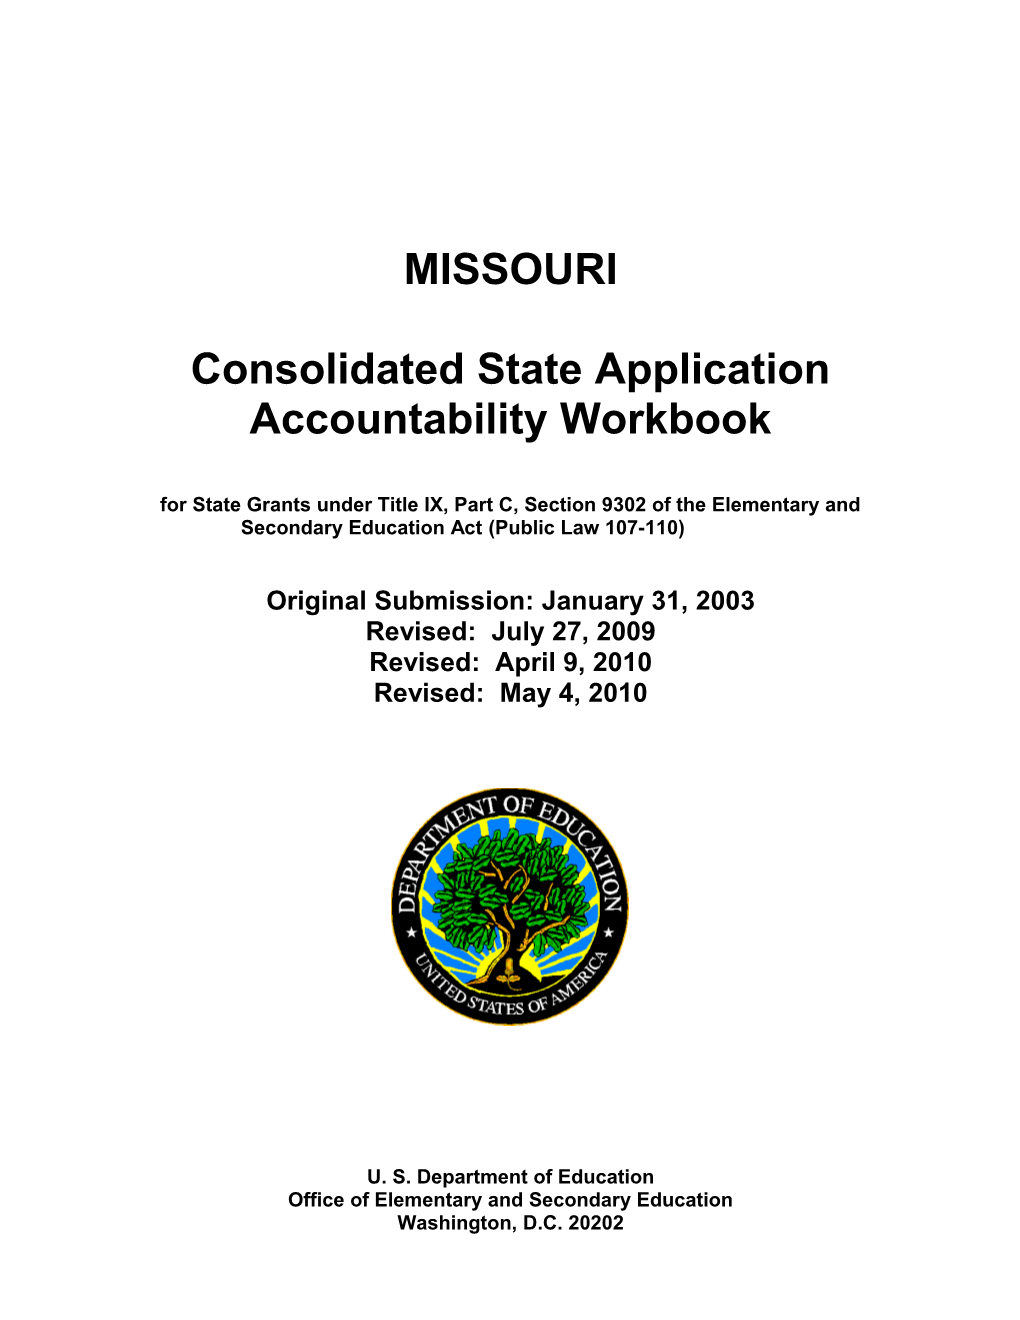 Missouri Consolidated State Application Accountability Workbook (MS WORD)